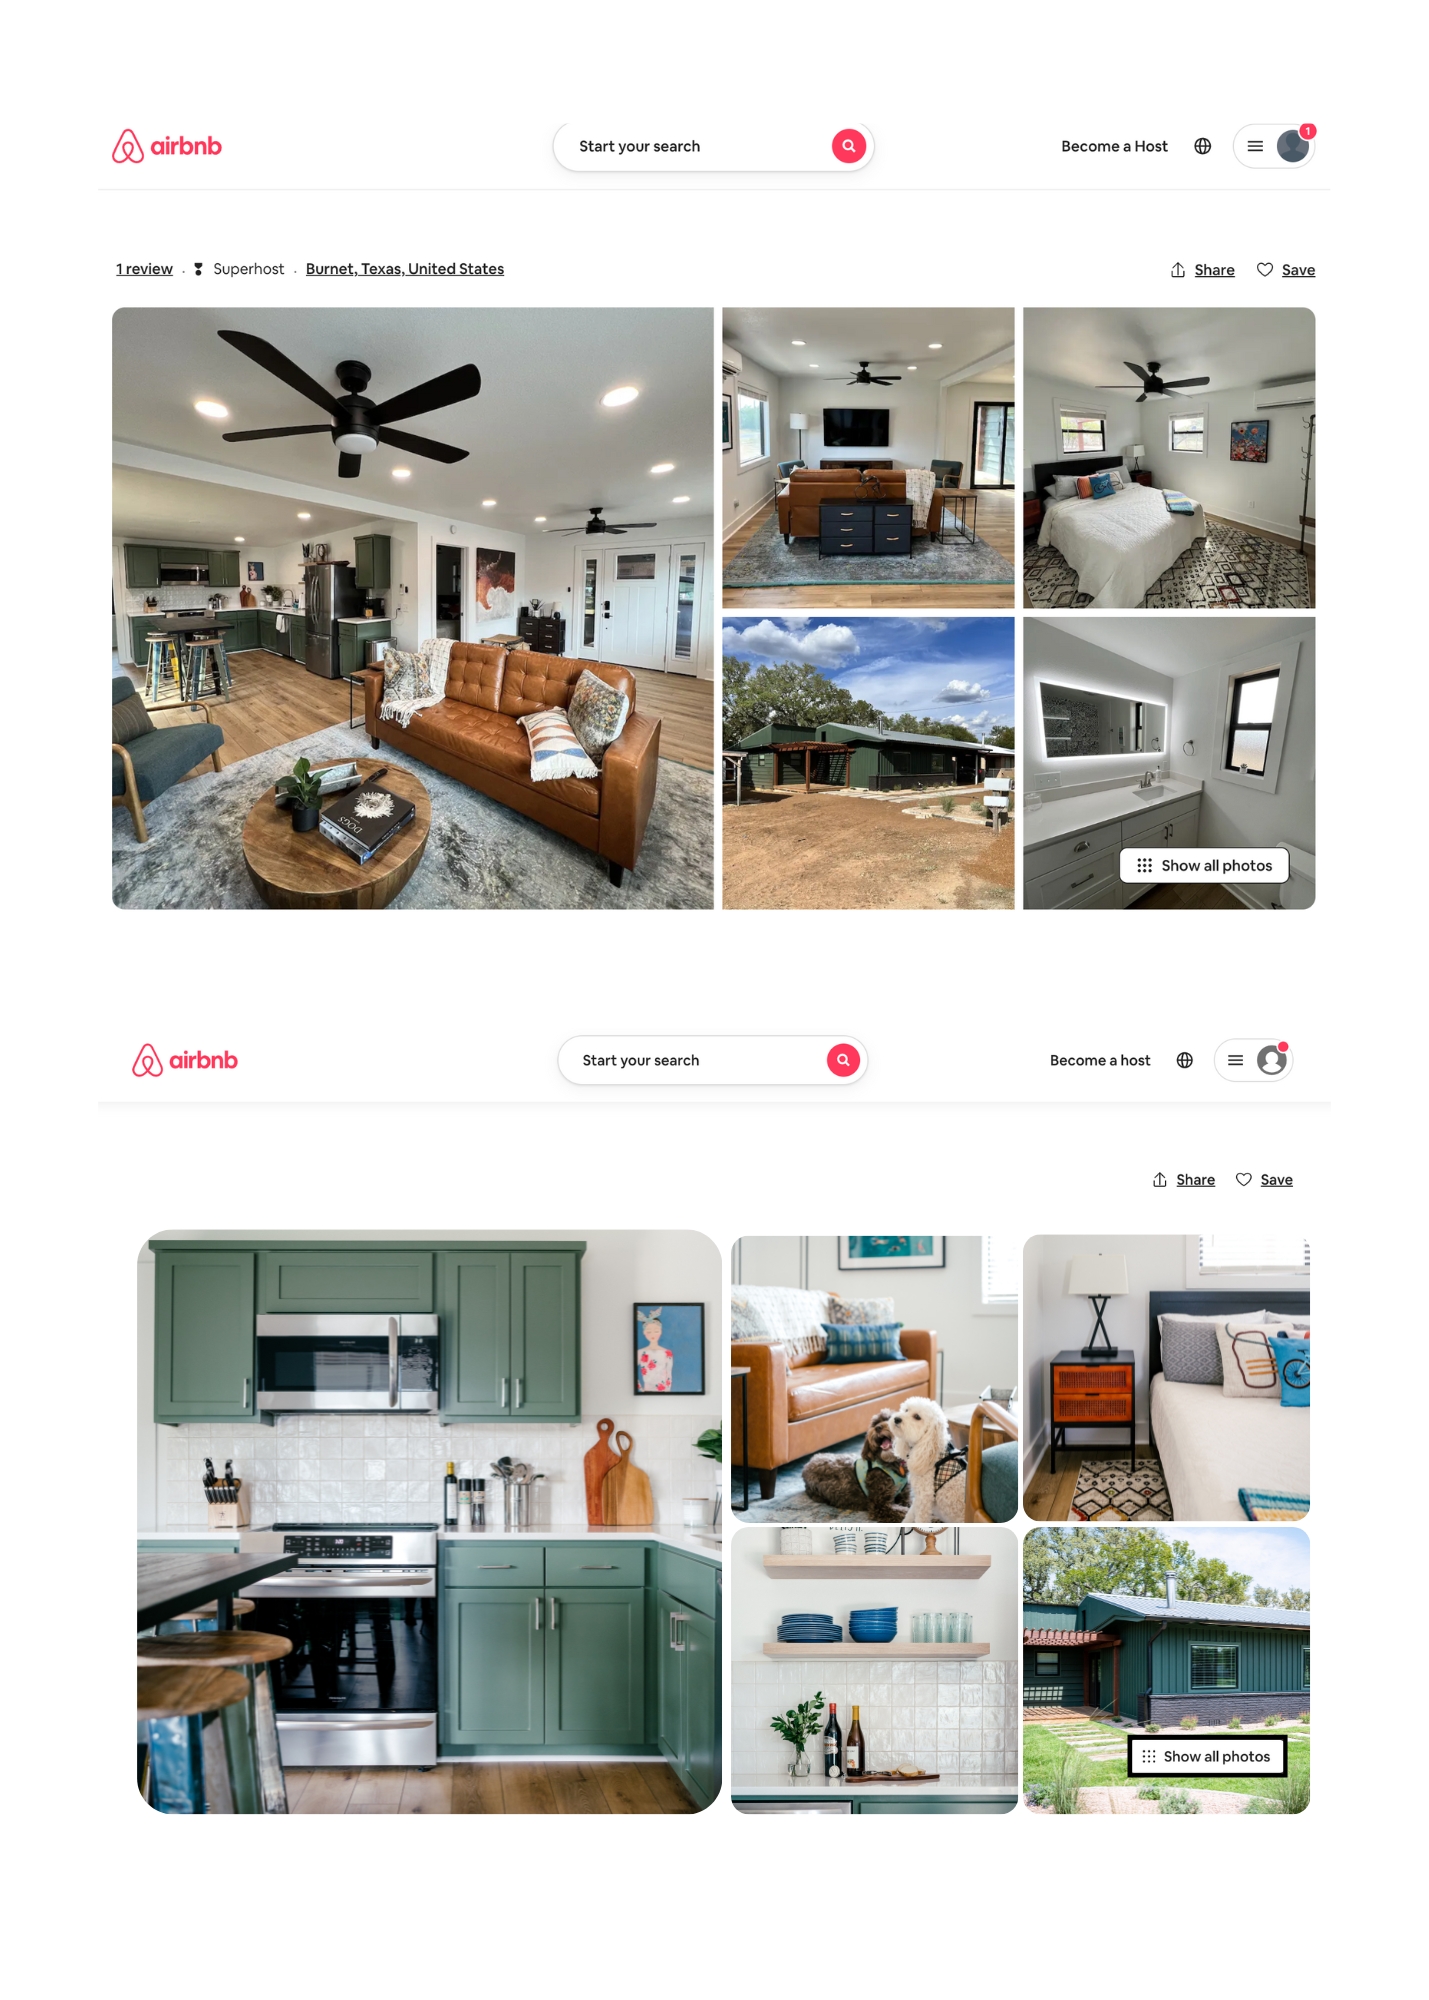 Investing in a professional Airbnb photographer such as me a Houston Interior Design Photographer you are receiving high quality Airbnb photography images that will grow your listing.